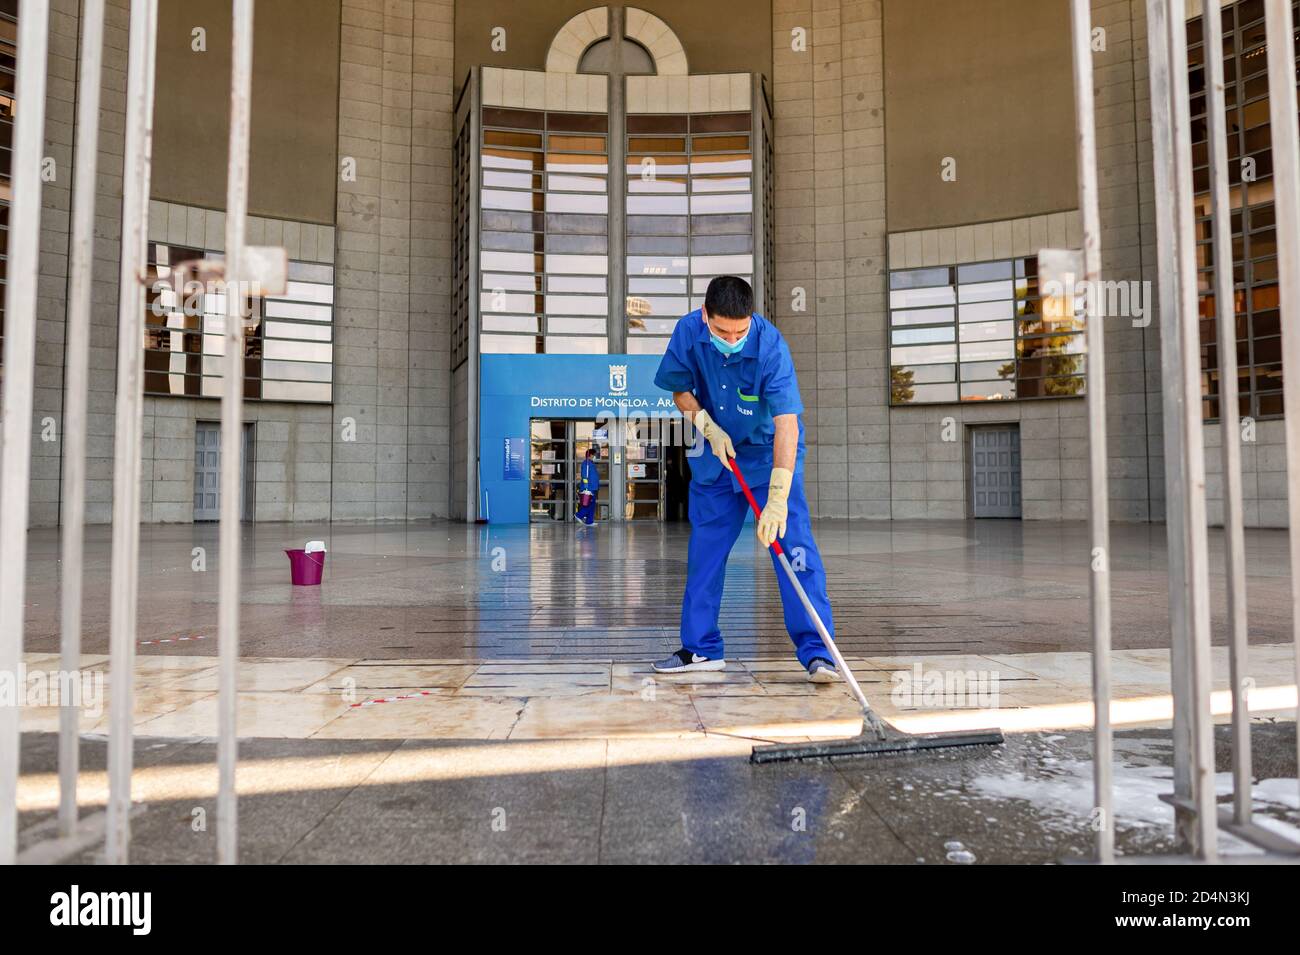 Madrid, Spain. 1st Jan, 2012. A man cleaning at the Moncloa District during the state of alarm.The Spanish government declared a state of alarm for 15 days in the Community of Madrid due to the high number of Covid 19 infections during the second wave of the pandemic in Spain. Credit: Diego Radames/SOPA Images/ZUMA Wire/Alamy Live News Stock Photo